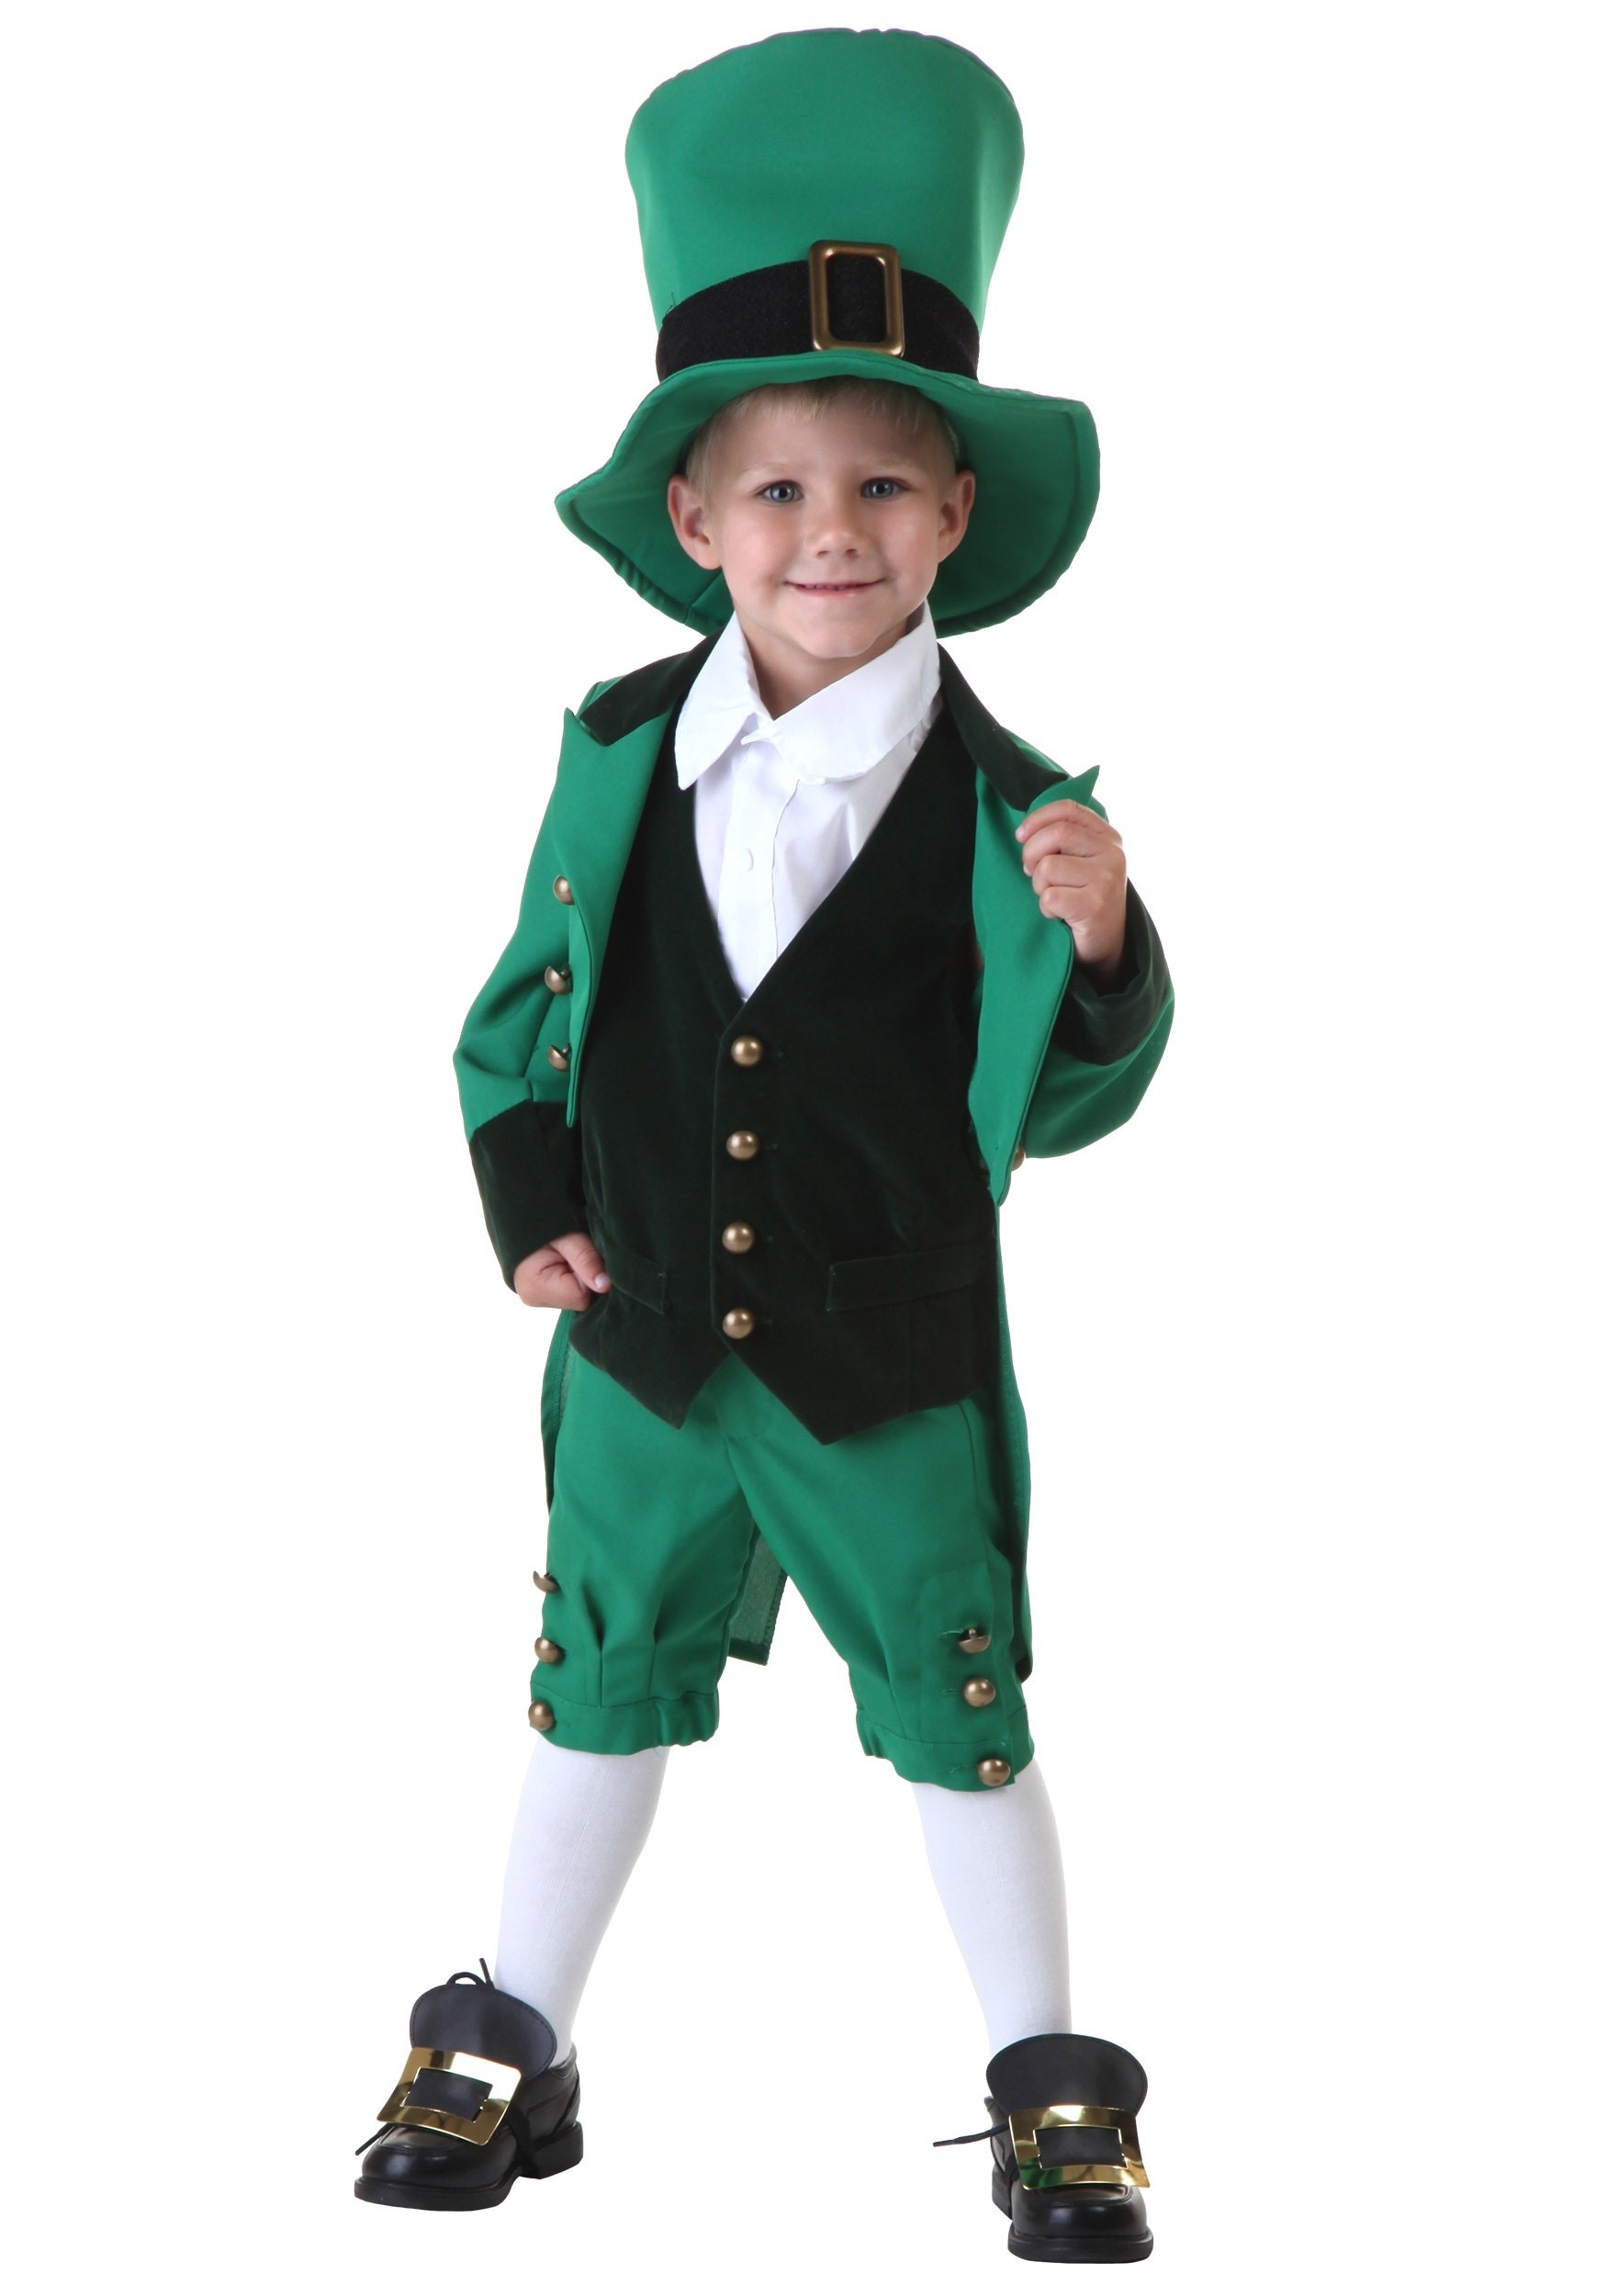 Photos - Fancy Dress Toddler FUN Costumes Classic Leprechaun Costume for Toddlers | St. Patrick's Day C 